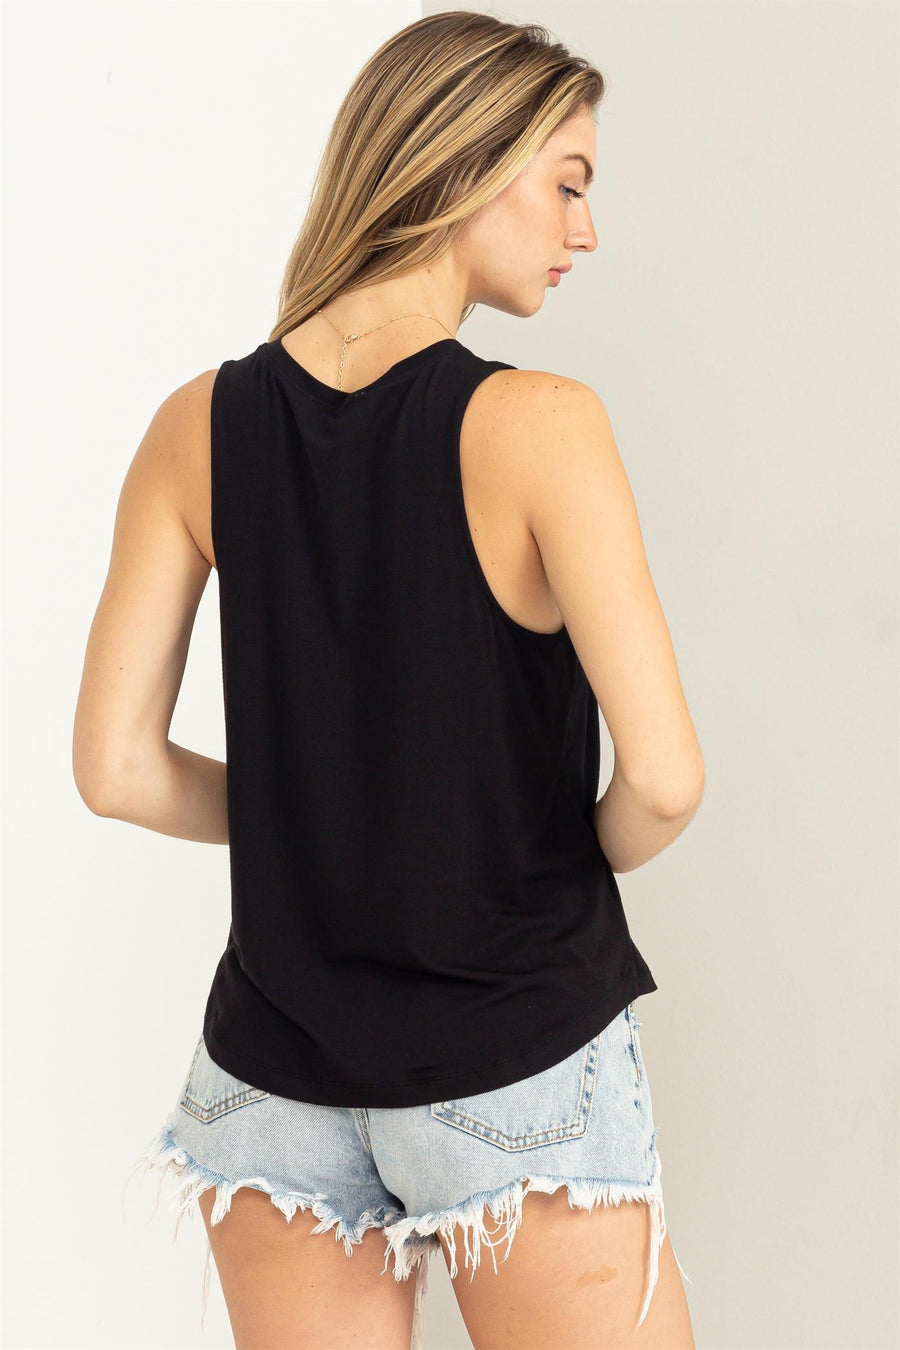 The back view of a woman wearing denim shorts and a HYFVE sleeveless black tank top.